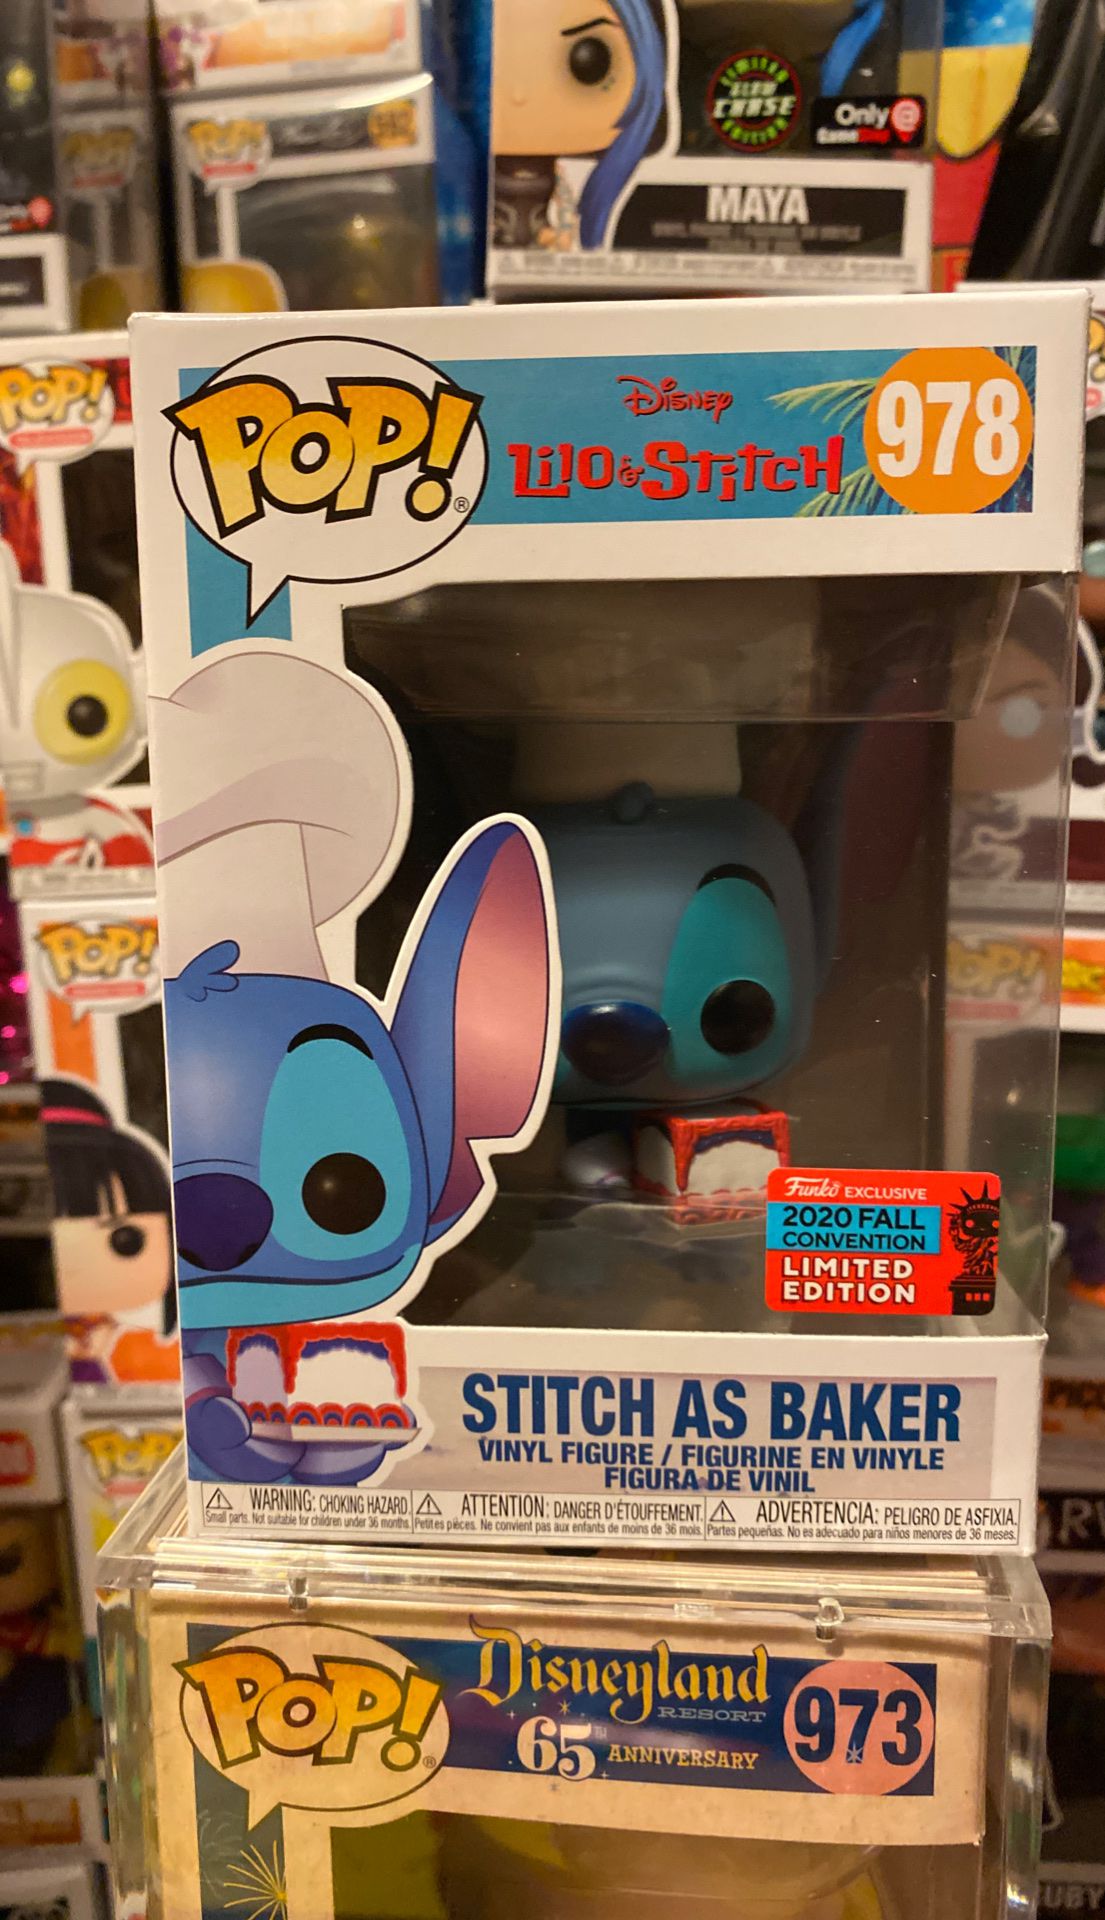 Disney stitch as baker nycc shared convention funko pop